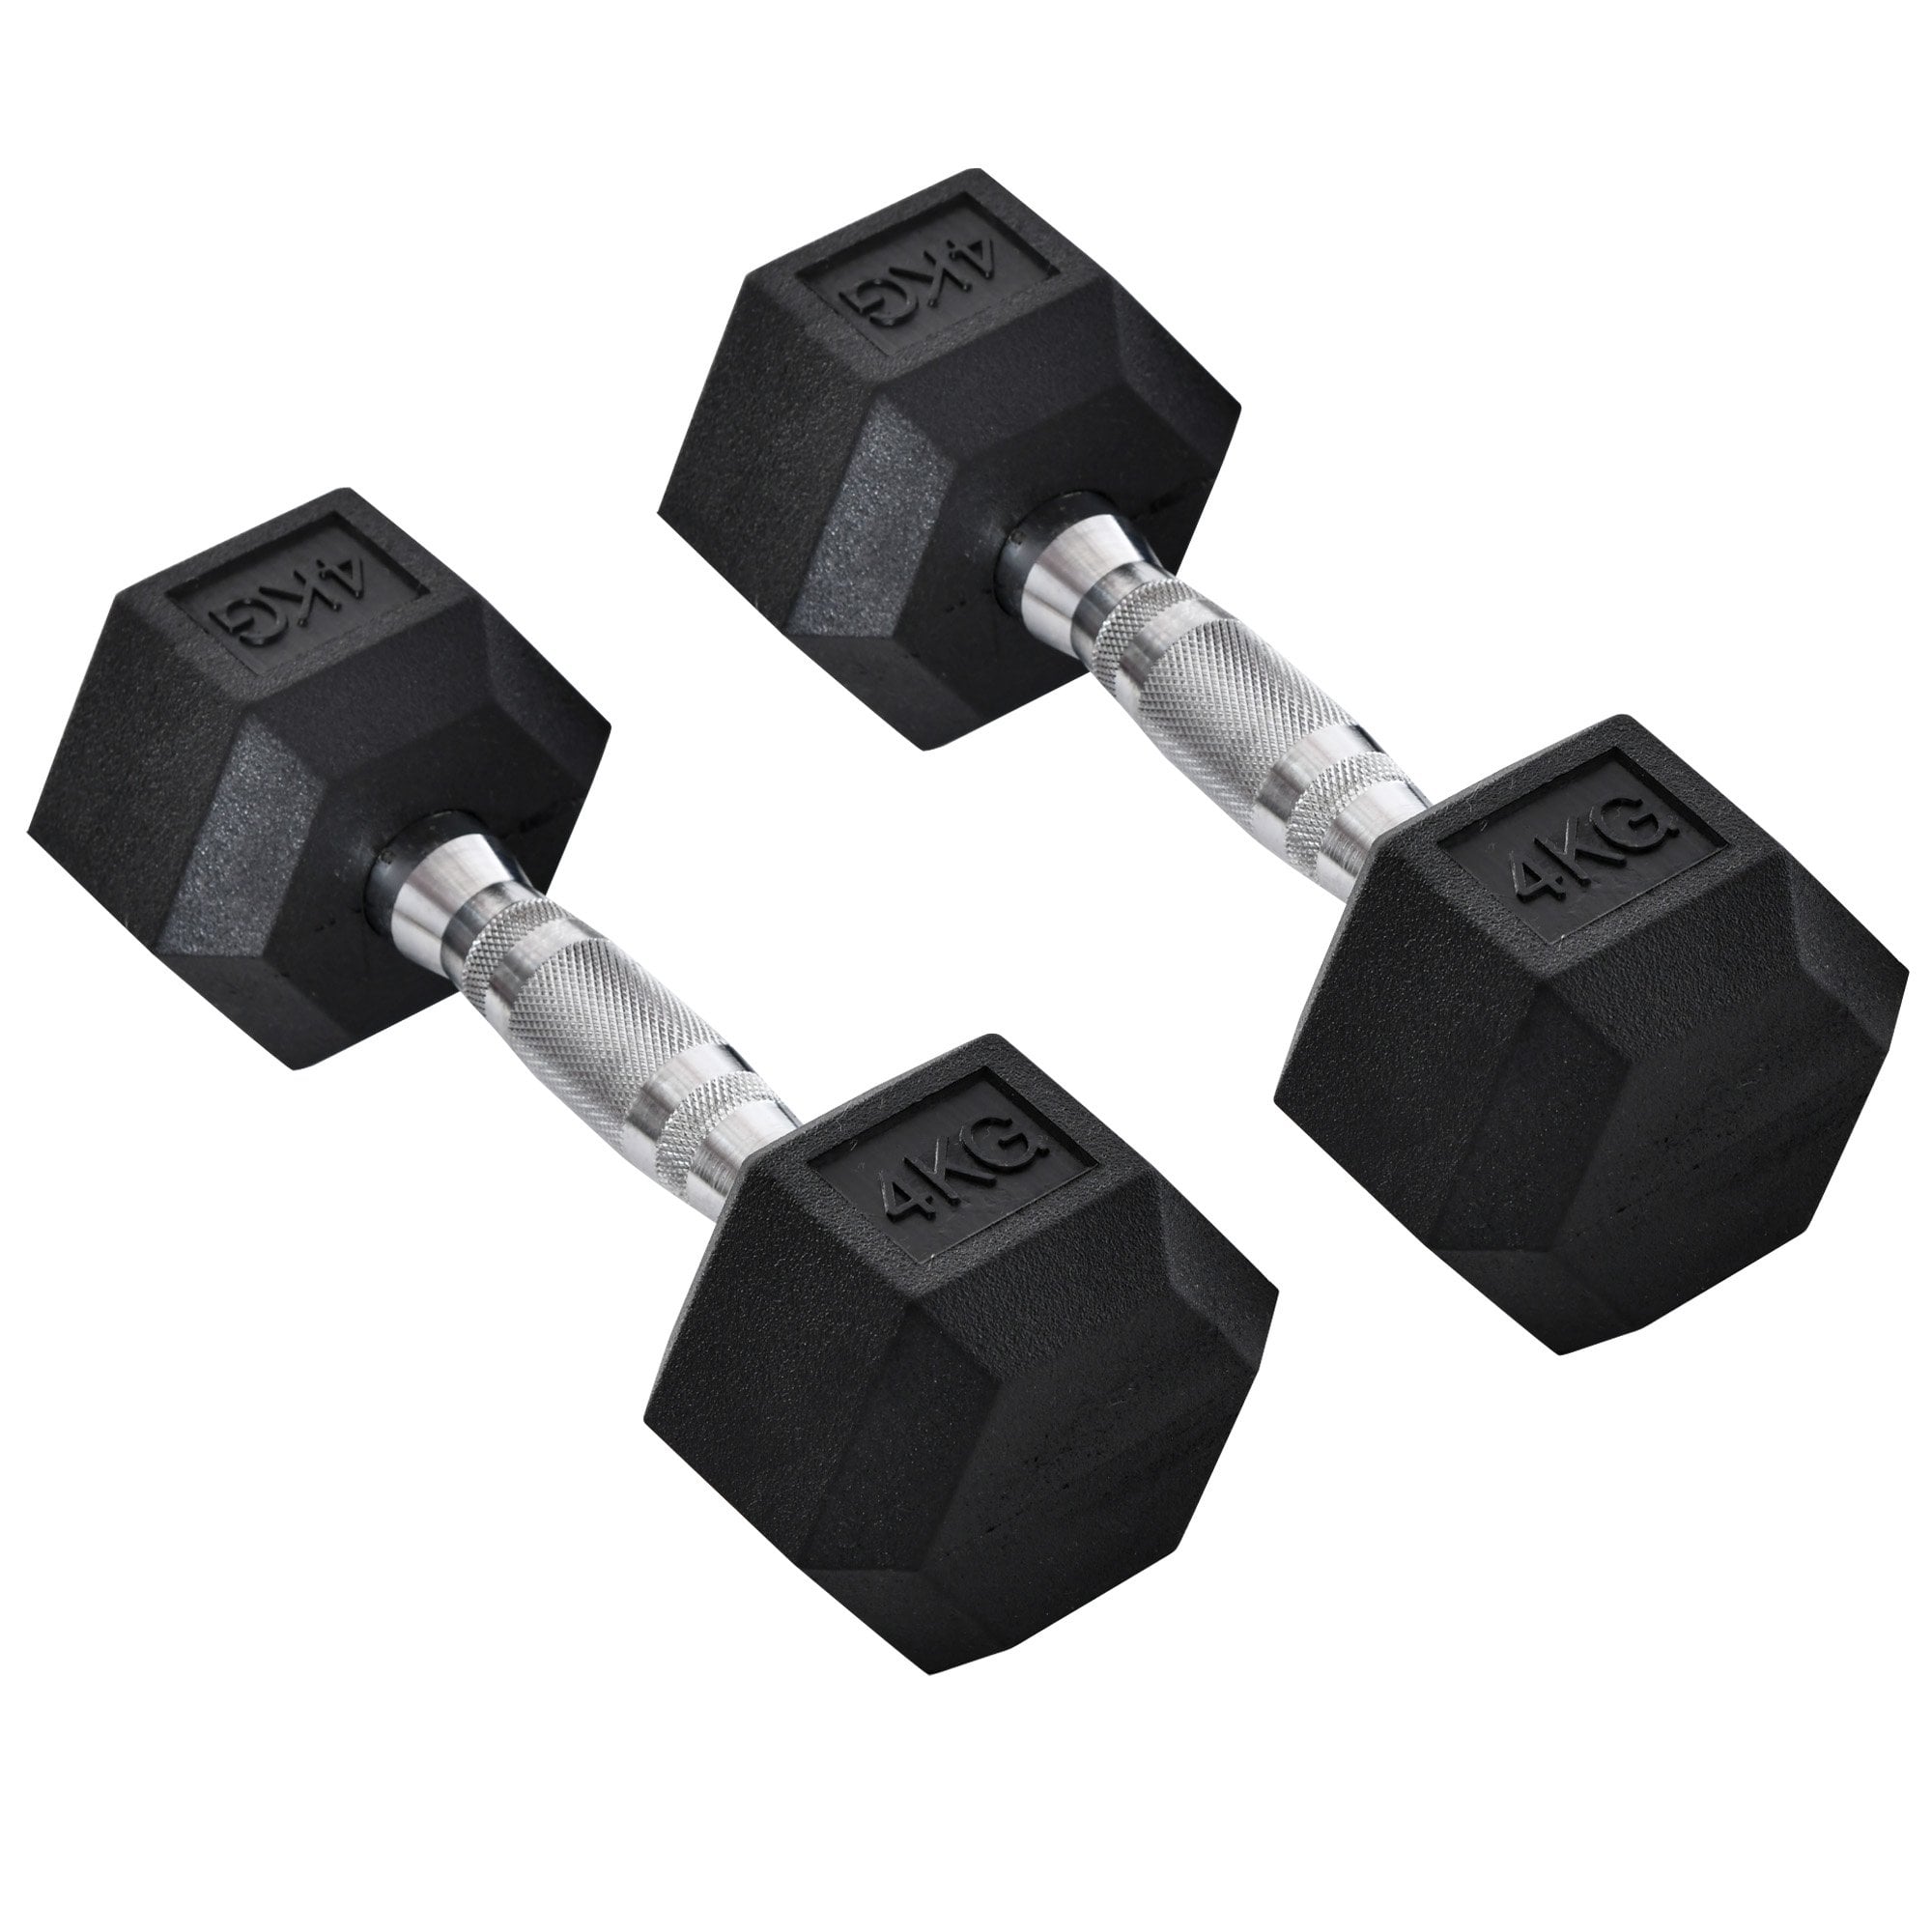 2x4kg Rubber Dumbbell Sports Hex Weights Sets Home Gym Fitness Hexagonal Dumbbells Kit Weight Lifting Exercise - MAXFIT  | TJ Hughes Black